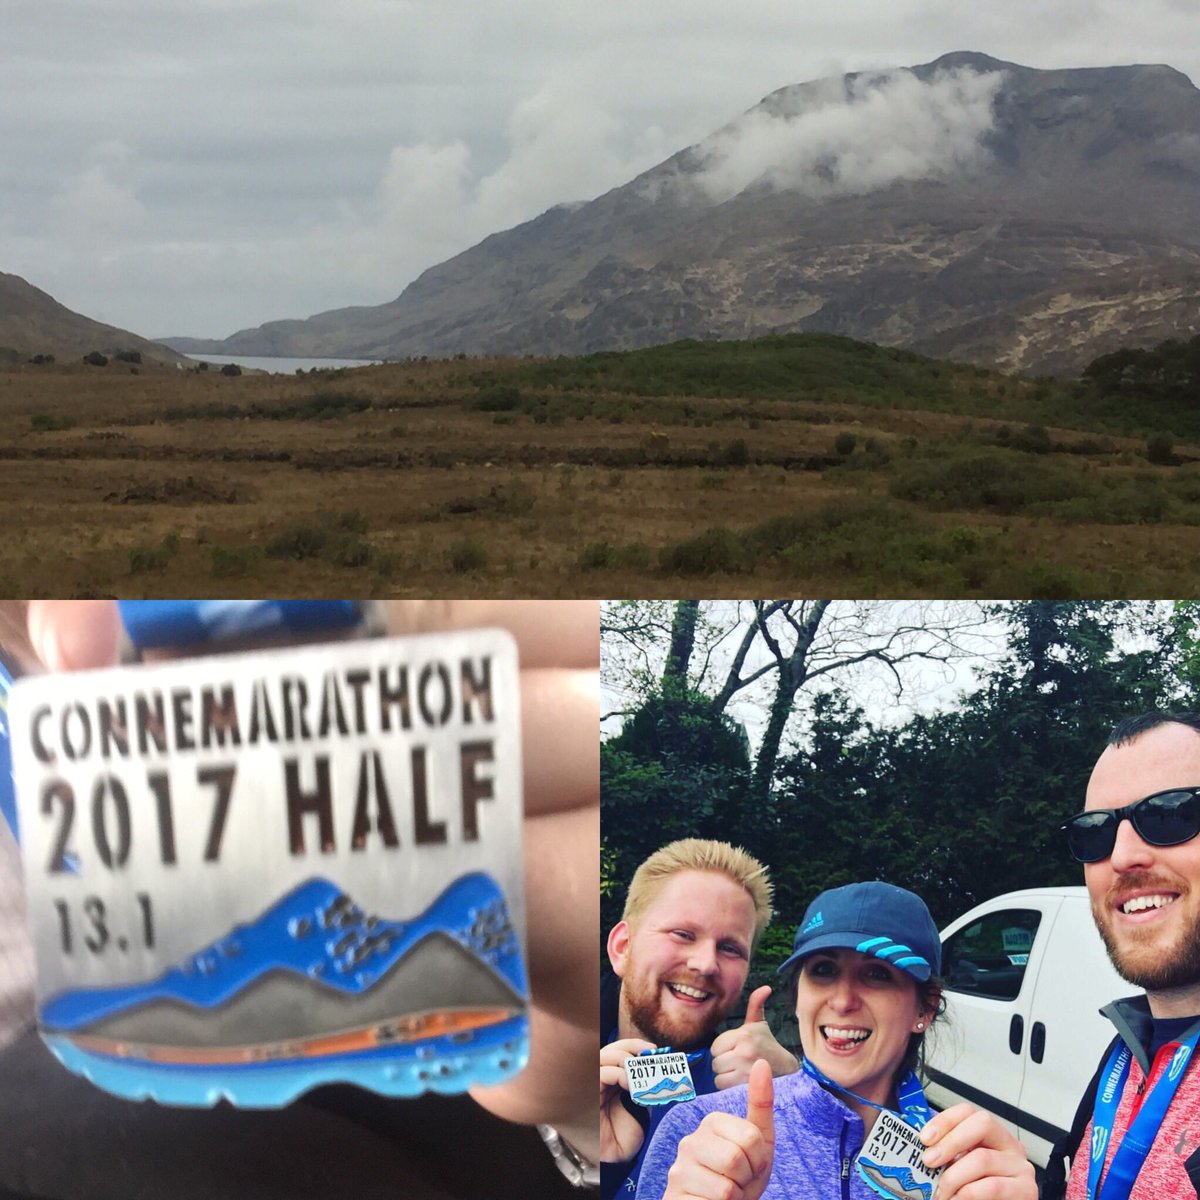 Legs are on fire and fighting tiredness, but the @connemarathon was a brilliant race. Will be back next year.